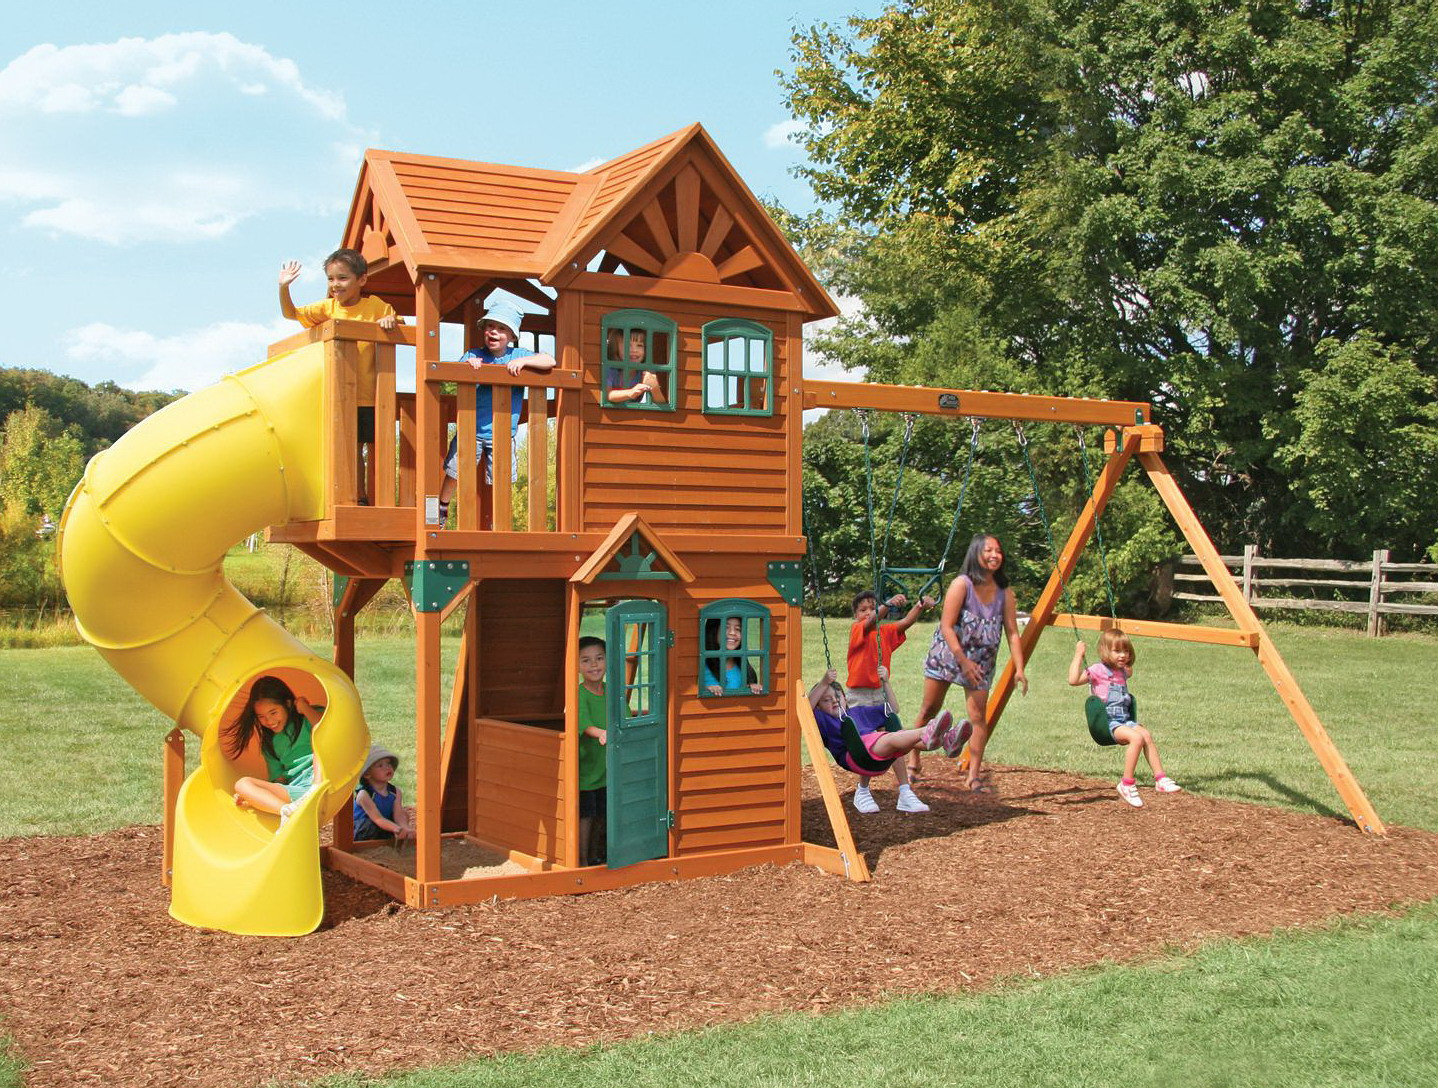 Kids Outdoors Playground
 New Giant Outdoor Wood Playground Play Set Wooden Kid s